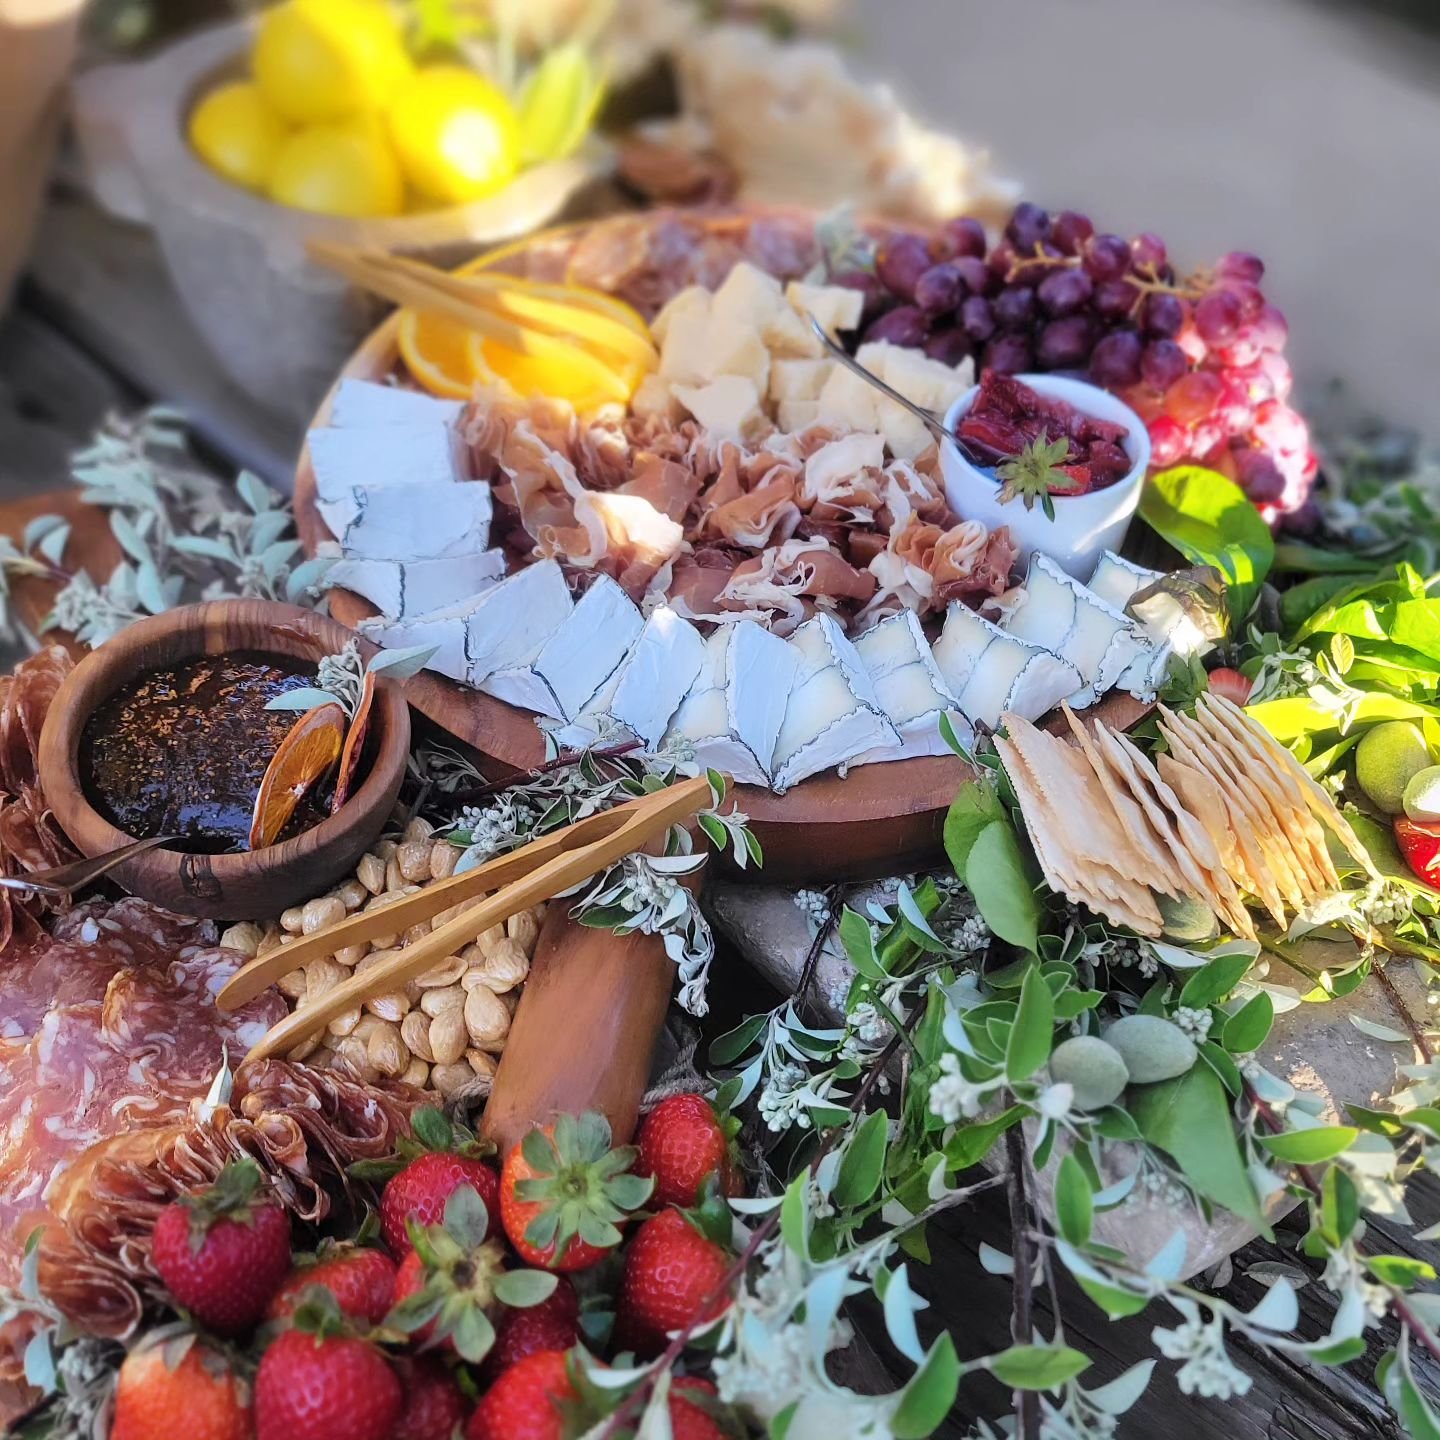 Can't stop thinking about this styling consultation I did for #rhyountville Such a delightful and collaborative experience!

#gatheringfeast #grazing #grazingtable #cheeseboard #collaboration #cheeseboard #charcuterieboard #charcuterie #catered #cate